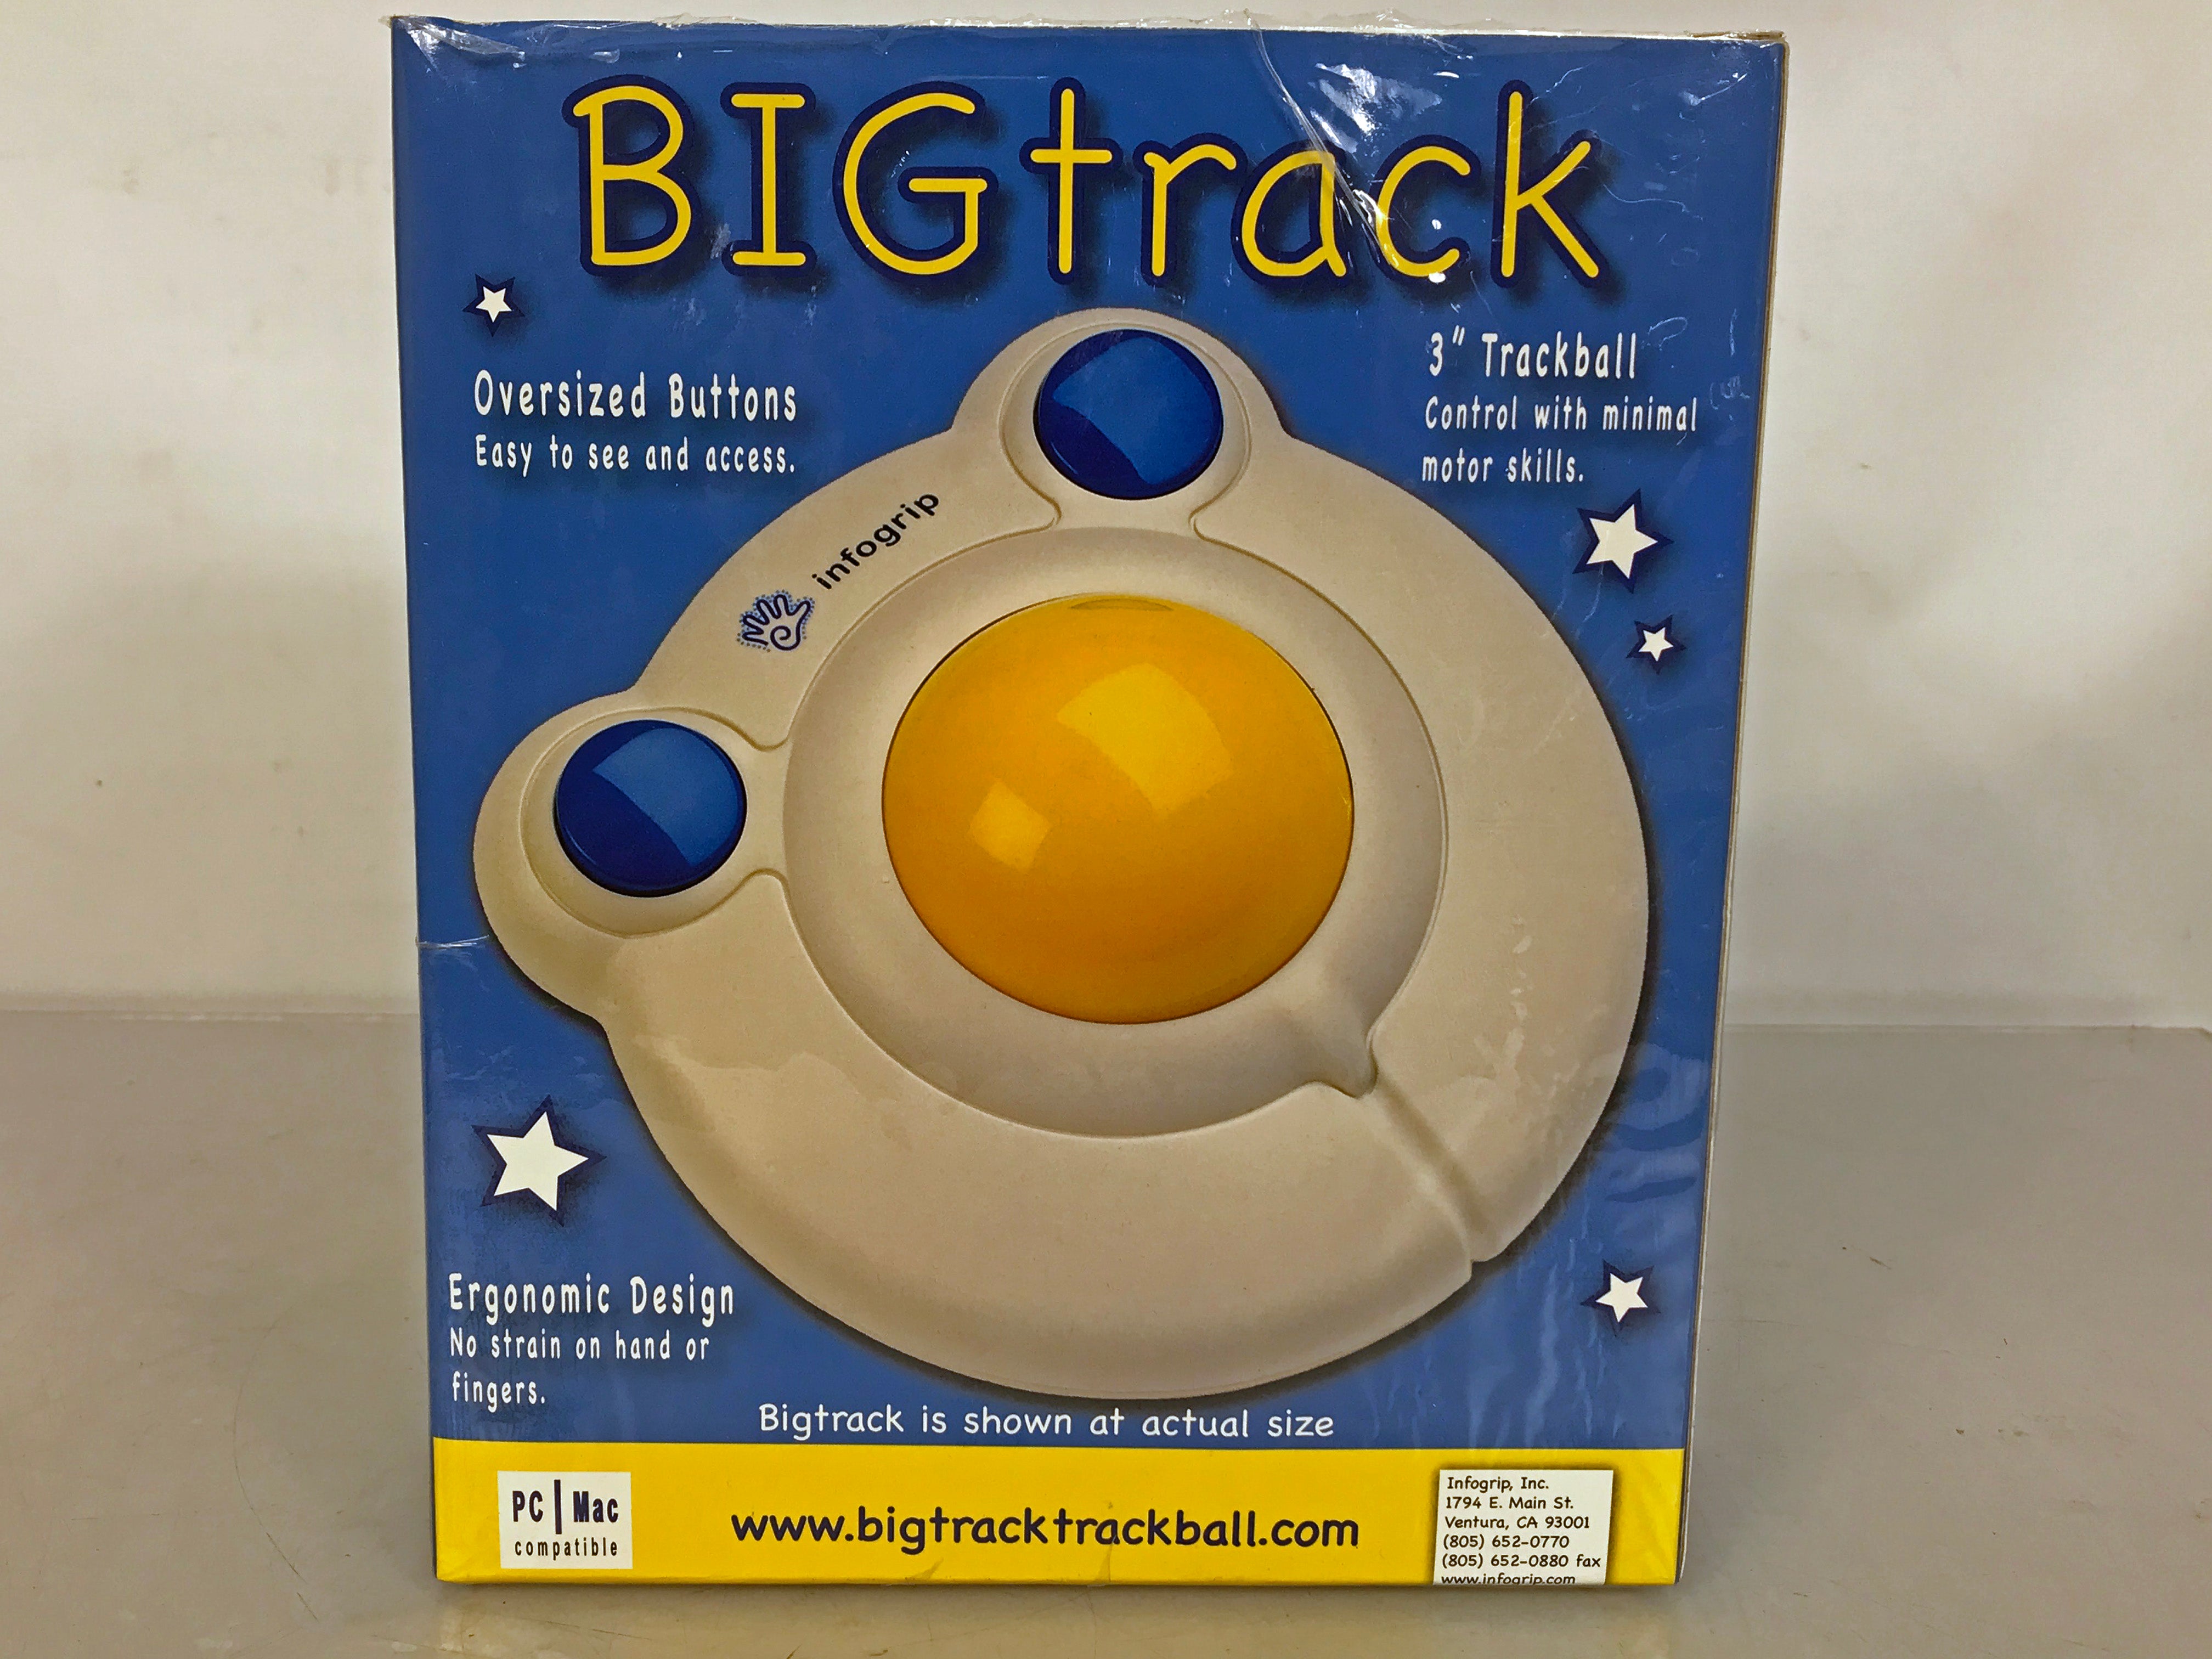 Infogrip BIGtrack 3" Switch Adapted Trackball Controller